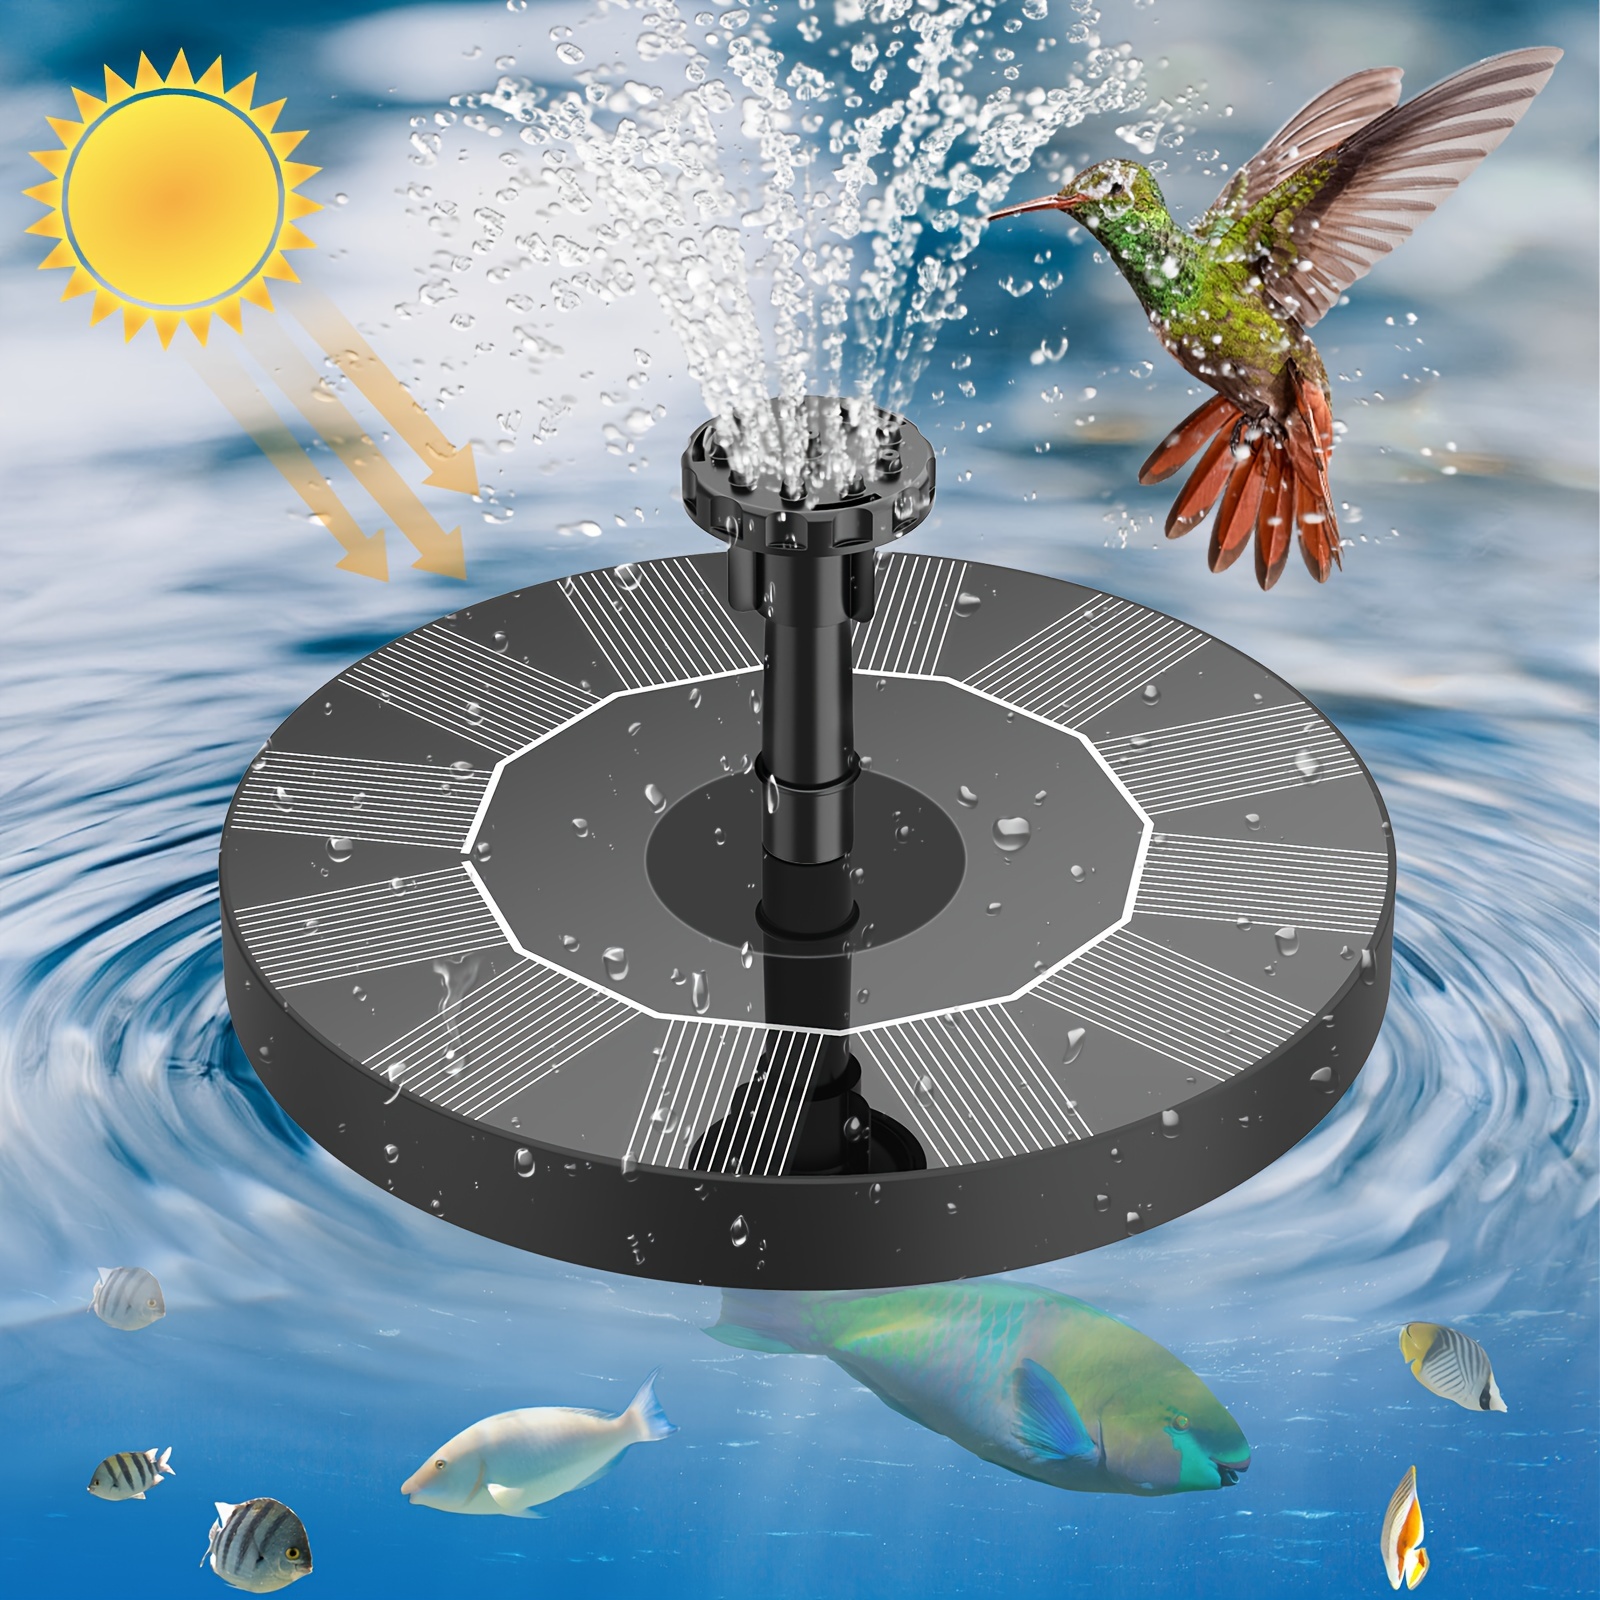 

1pc Solar Bird Bath Fountain Pump, Upgrade 3.5w Solar Fountain With 6 Nozzles, Free Standing Floating Solar Powered Water Fountain Pump For Garden, Pond, Pool, Outdoor